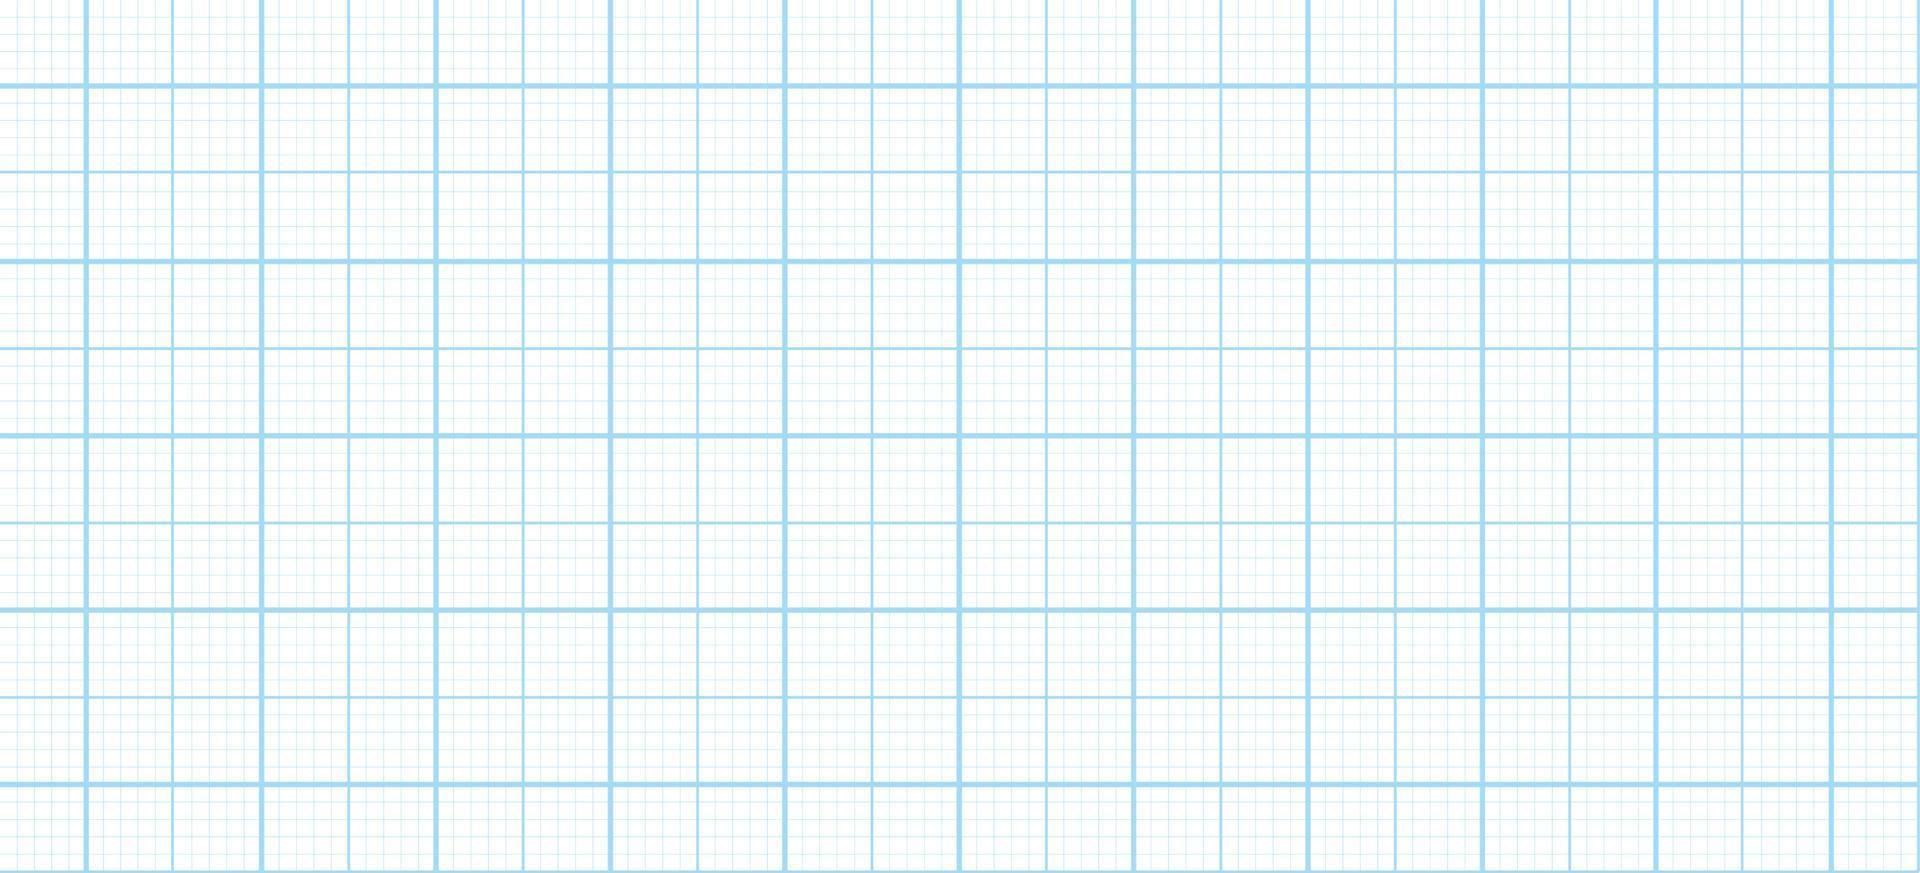 Blue millimeter graph paper grid background. Seamless pattern math paper texture. Desigh for rchitect plan, school project. Vector illustration